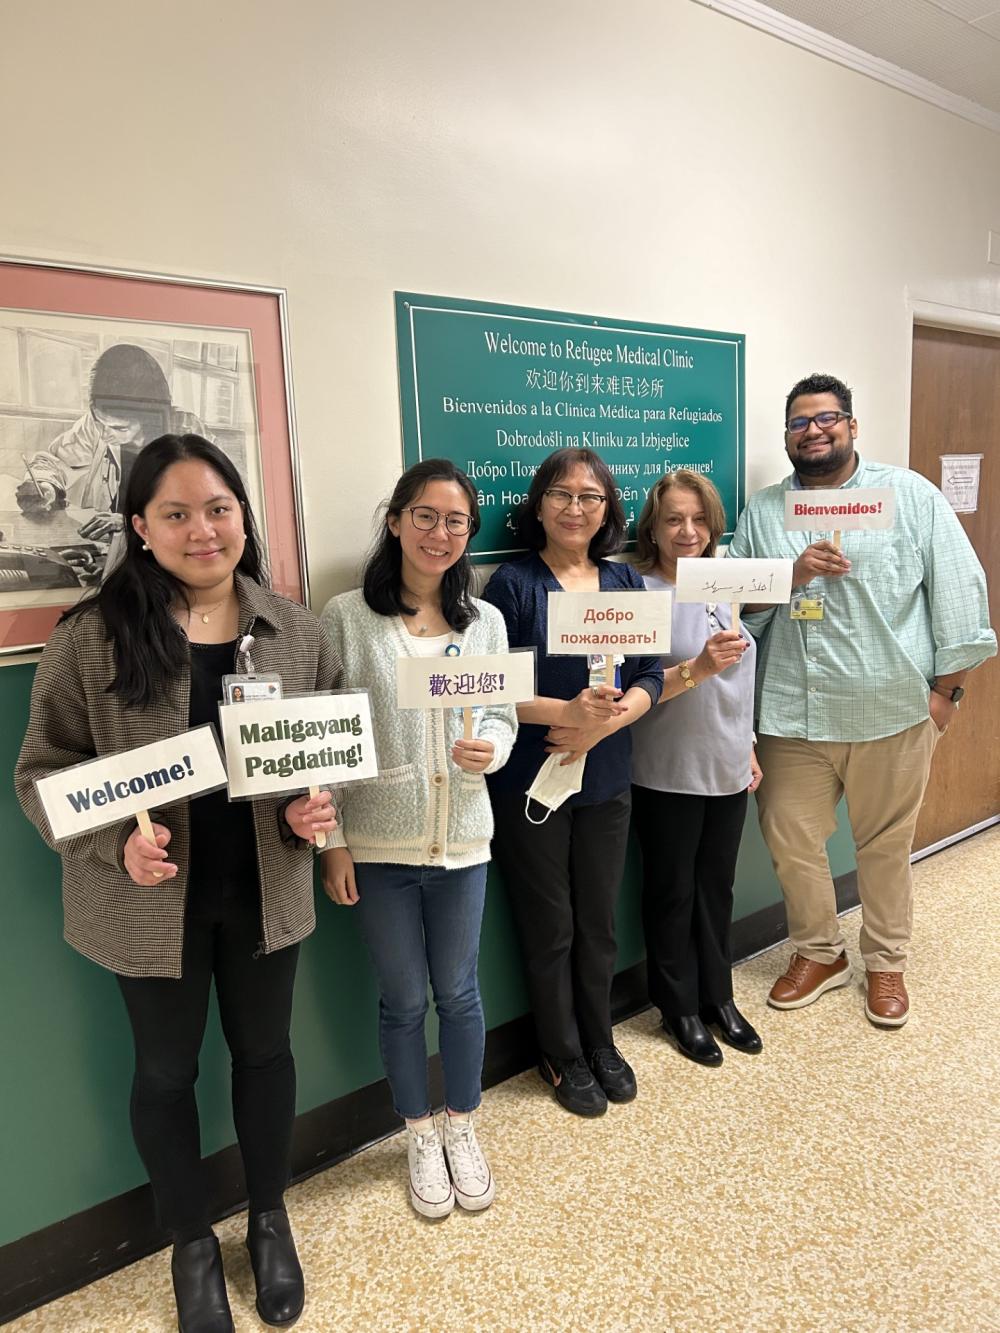 Newcomers Health Program team members holding "Welcome" signs in various languages, posing in front of sign at the Family Health Center's Refugee Medical Clinic